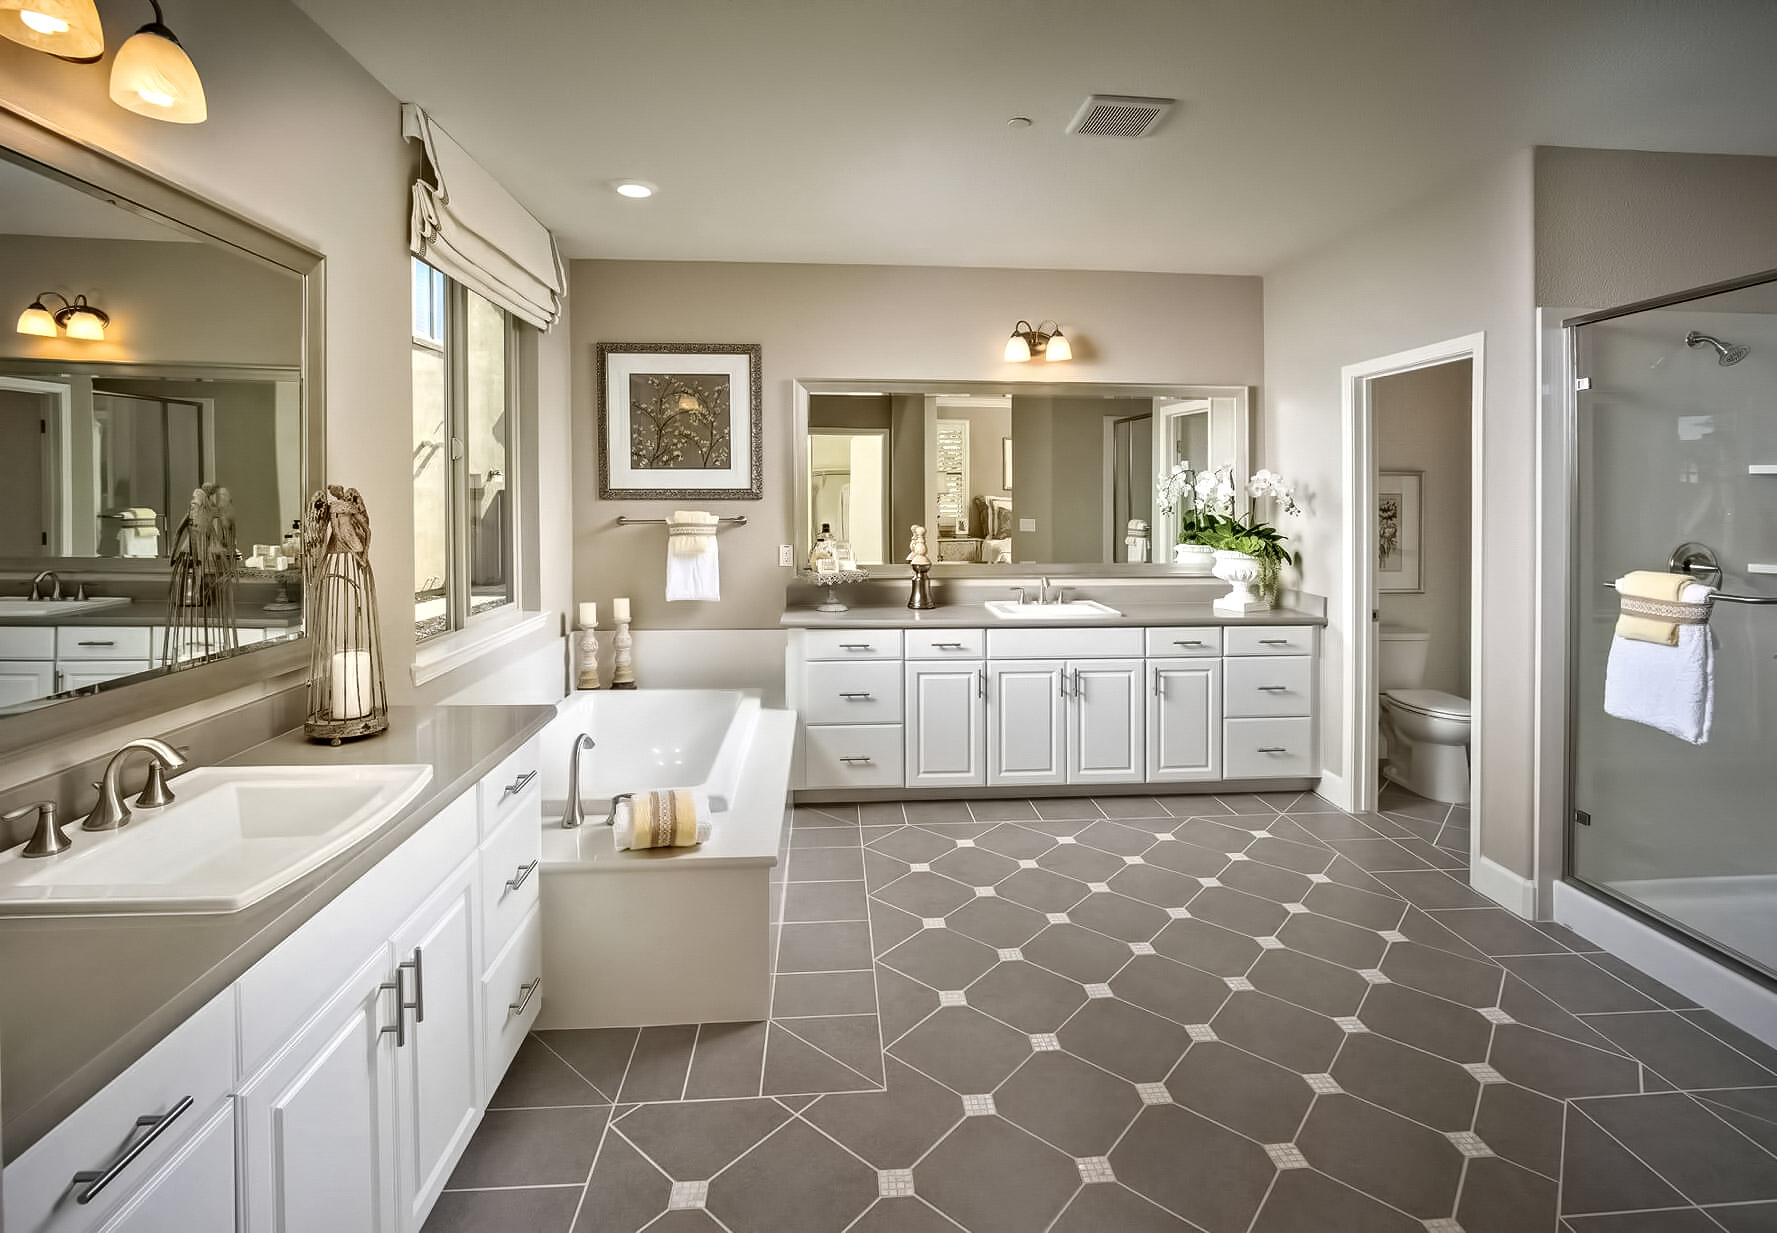 Every Function Needs Its Own Space - Top 4 Rules to Consider for a Luxury Bathroom Renovation